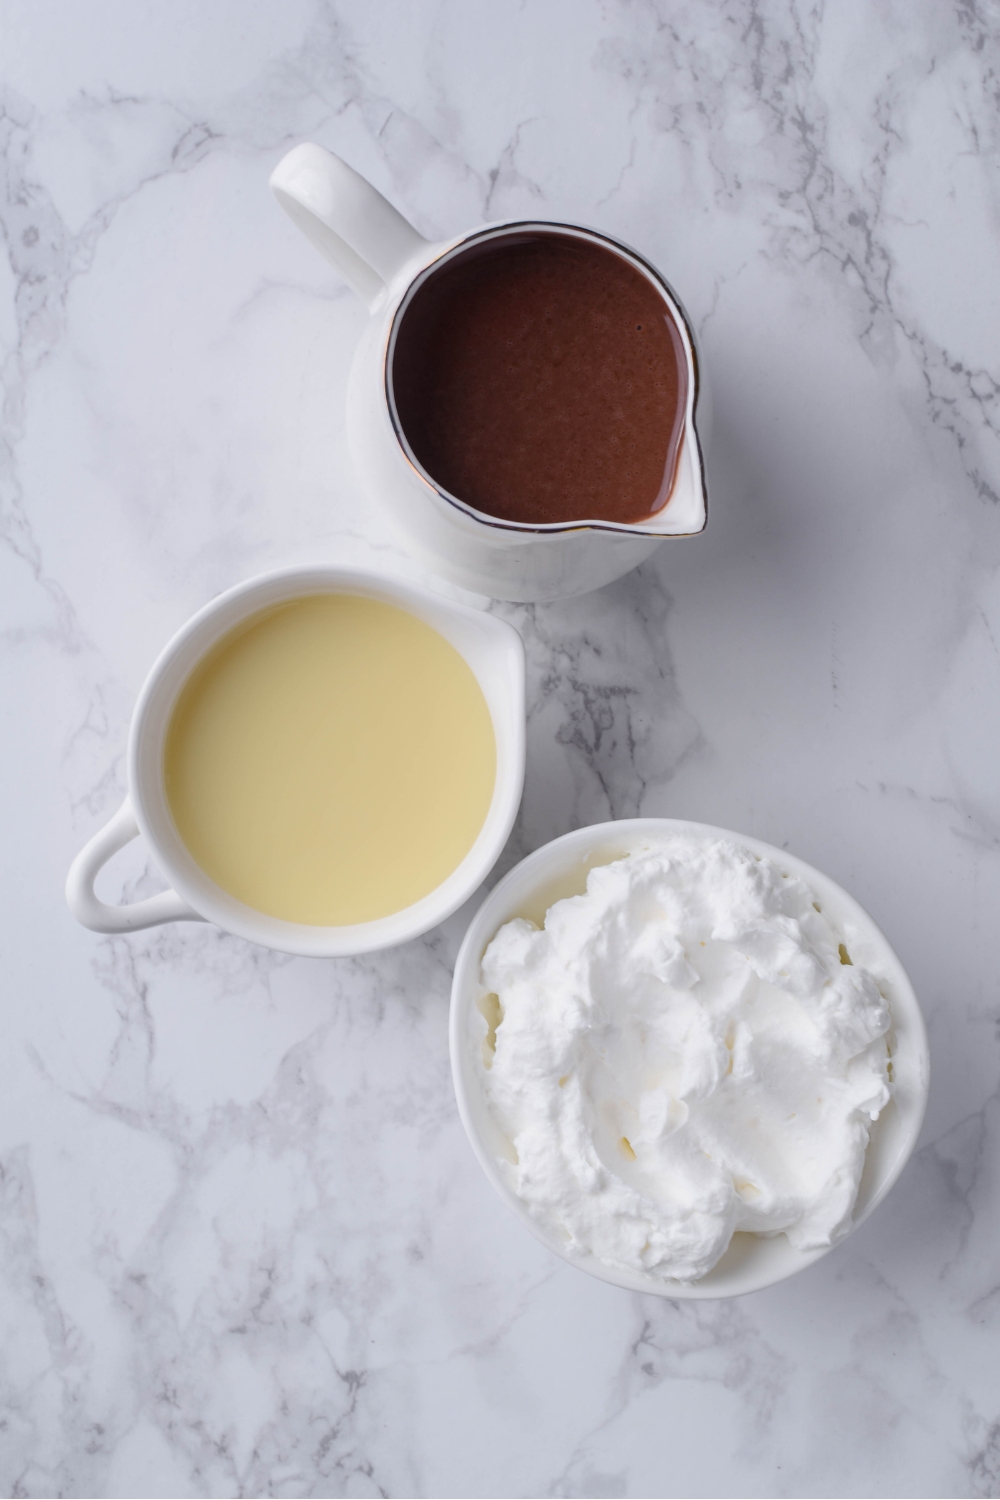 Overhead view of a pitcher of chocolate milk, a bowl of cool whip, and a bowl of condensed milk.